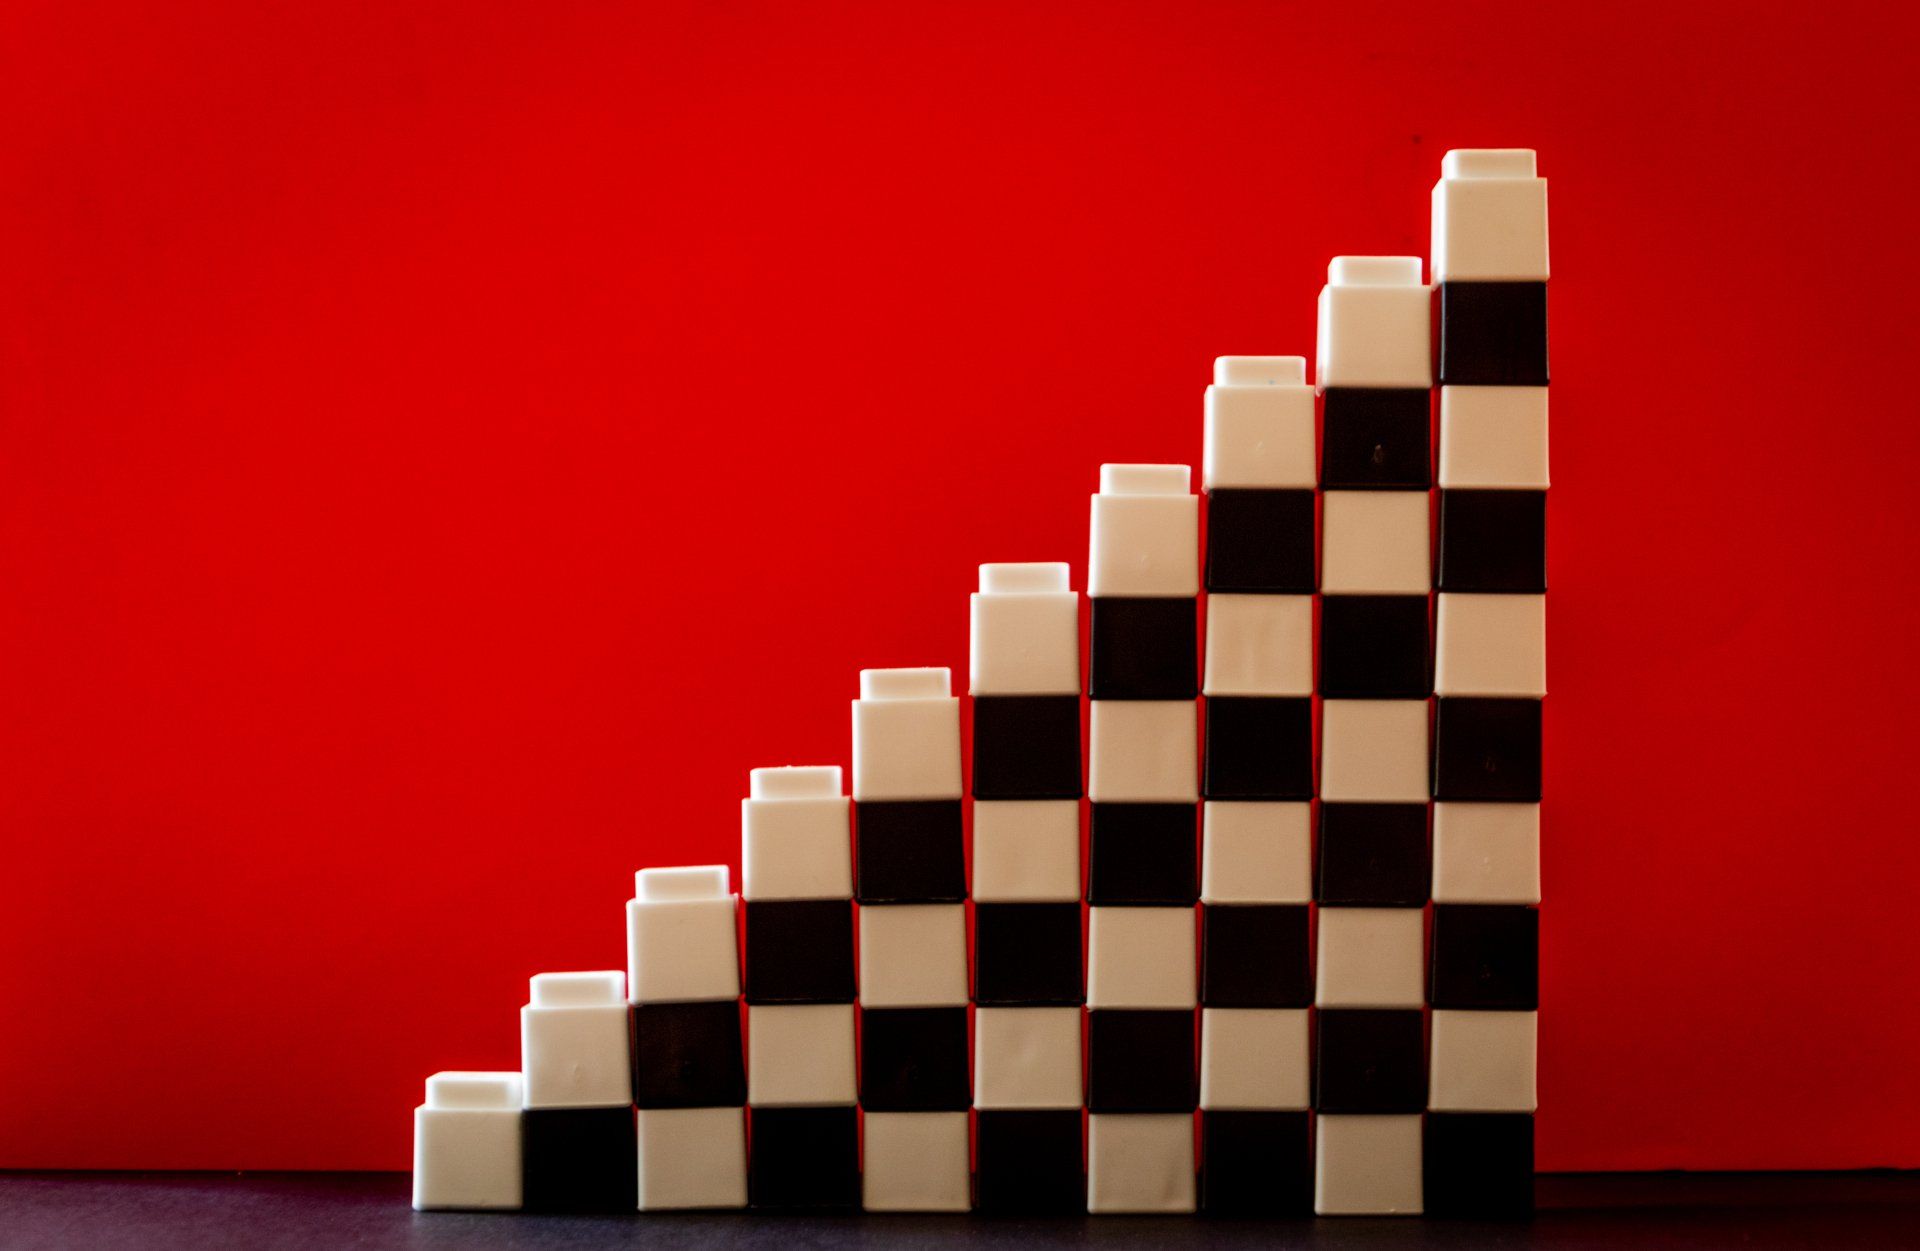 Black and white blocks stacked like a staircase to show organizational structure